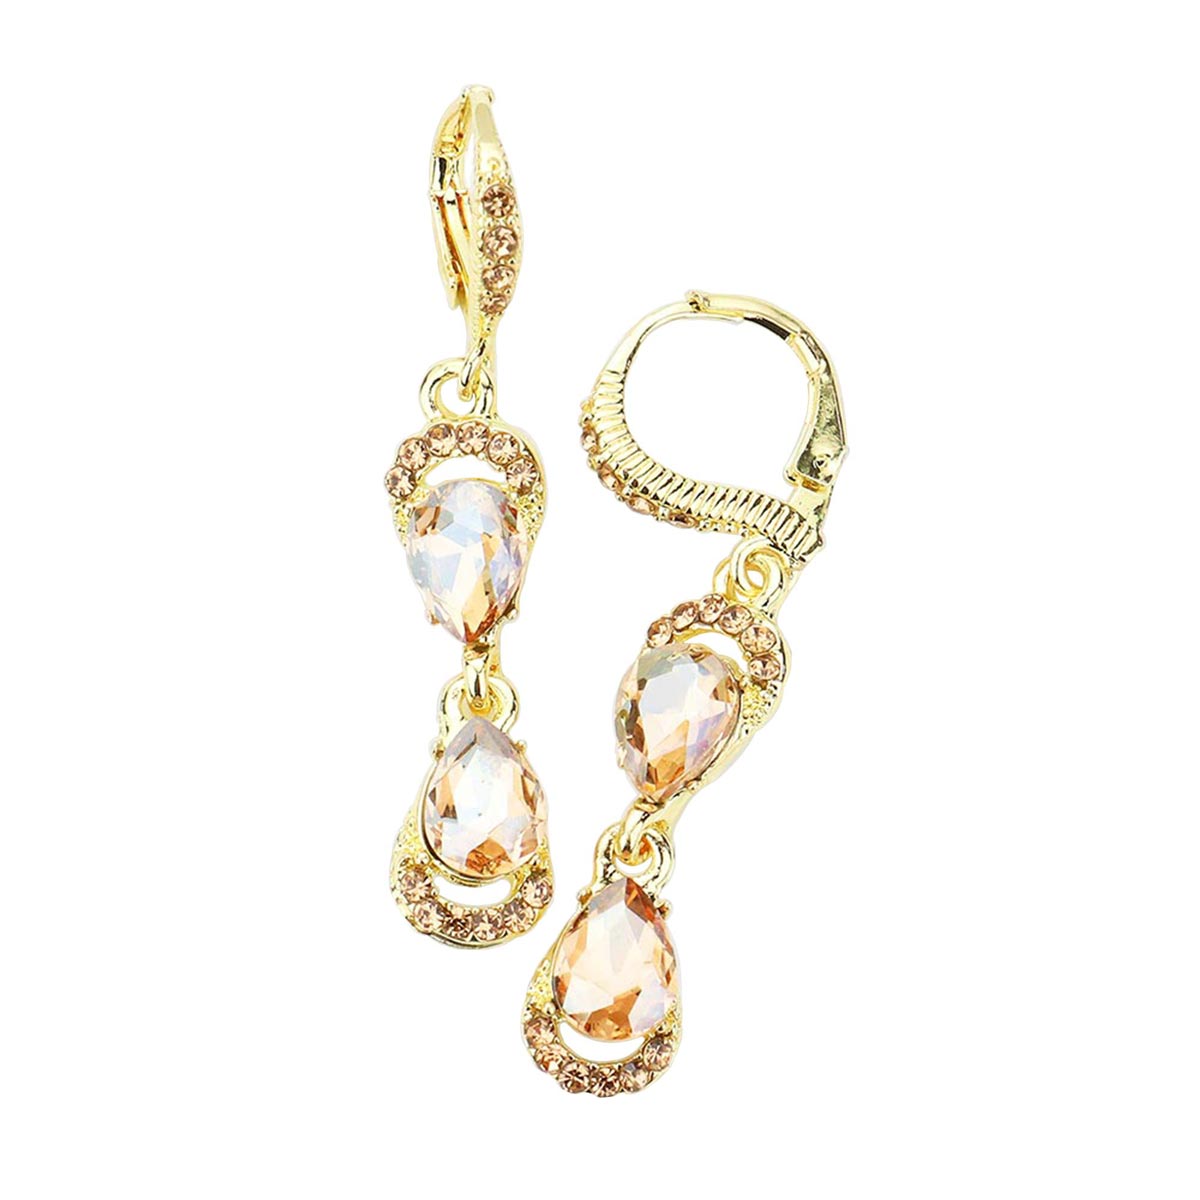  Lt Col Topaz Double Teardrop Stone Link Dangle Lever Back Evening Earrings, Wear a pop of shine to complete your ensemble with a classy style. The perfect accessory for adding just the right amount of shimmer and a touch of class to special events. Jewelry that fits your lifestyle and makes your moments awesome! They will dangle on your earlobes & bring a smile of joy to those who look at you.